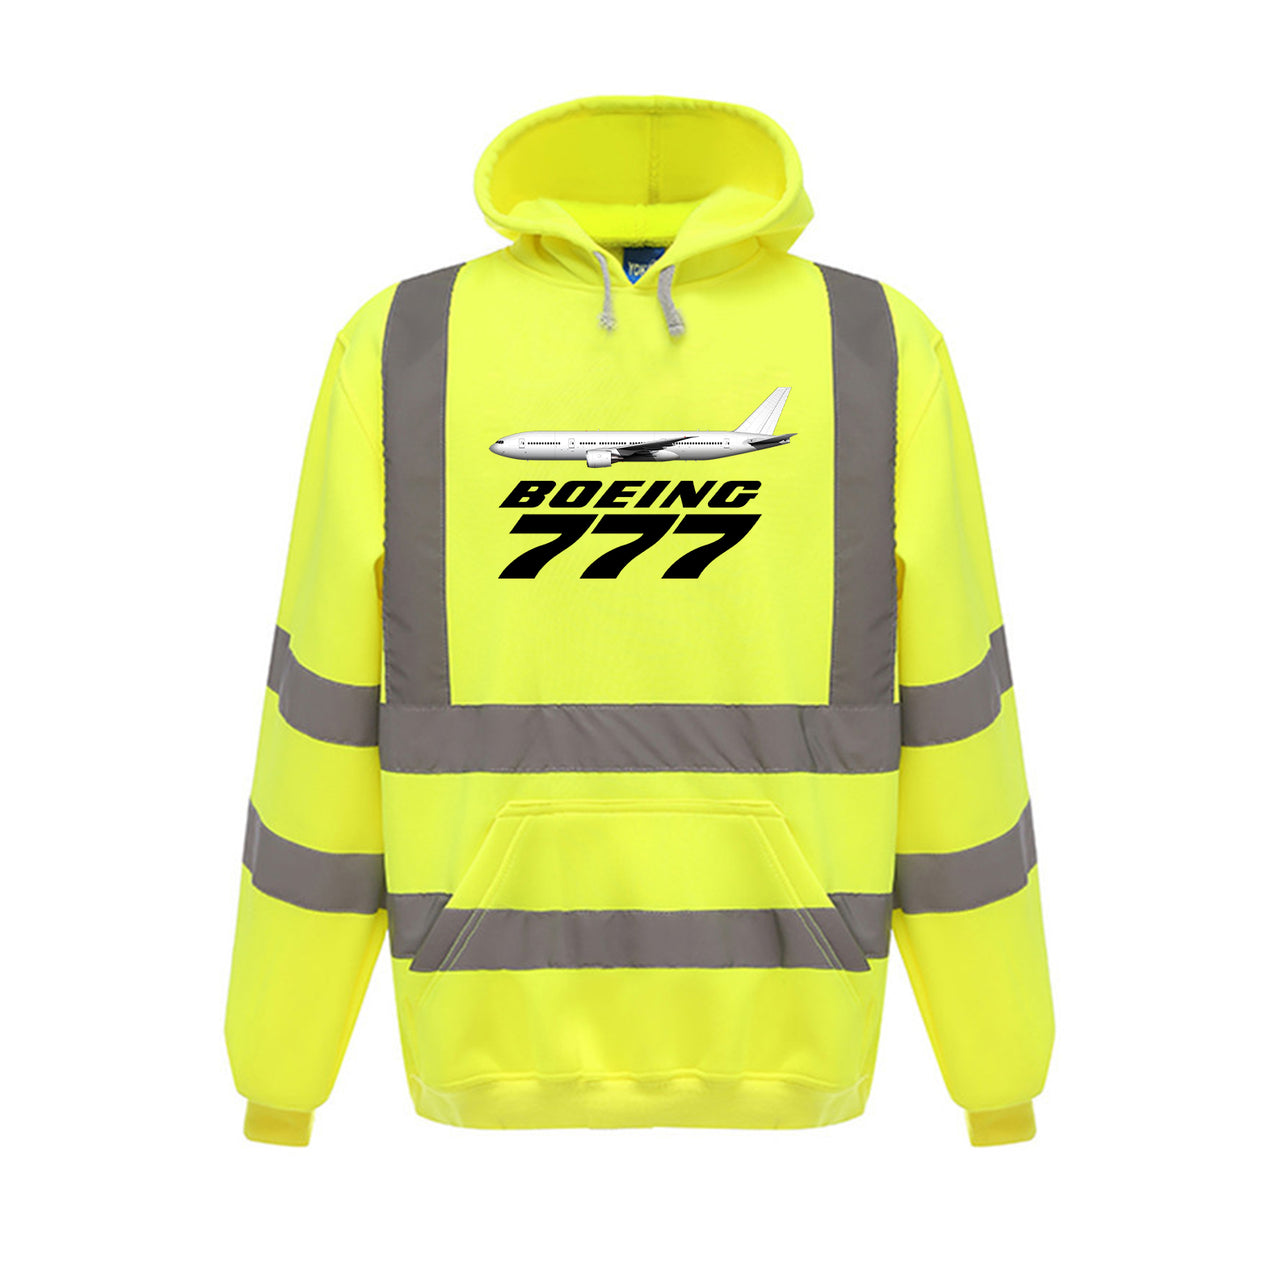 The Boeing 777 Designed Reflective Hoodies